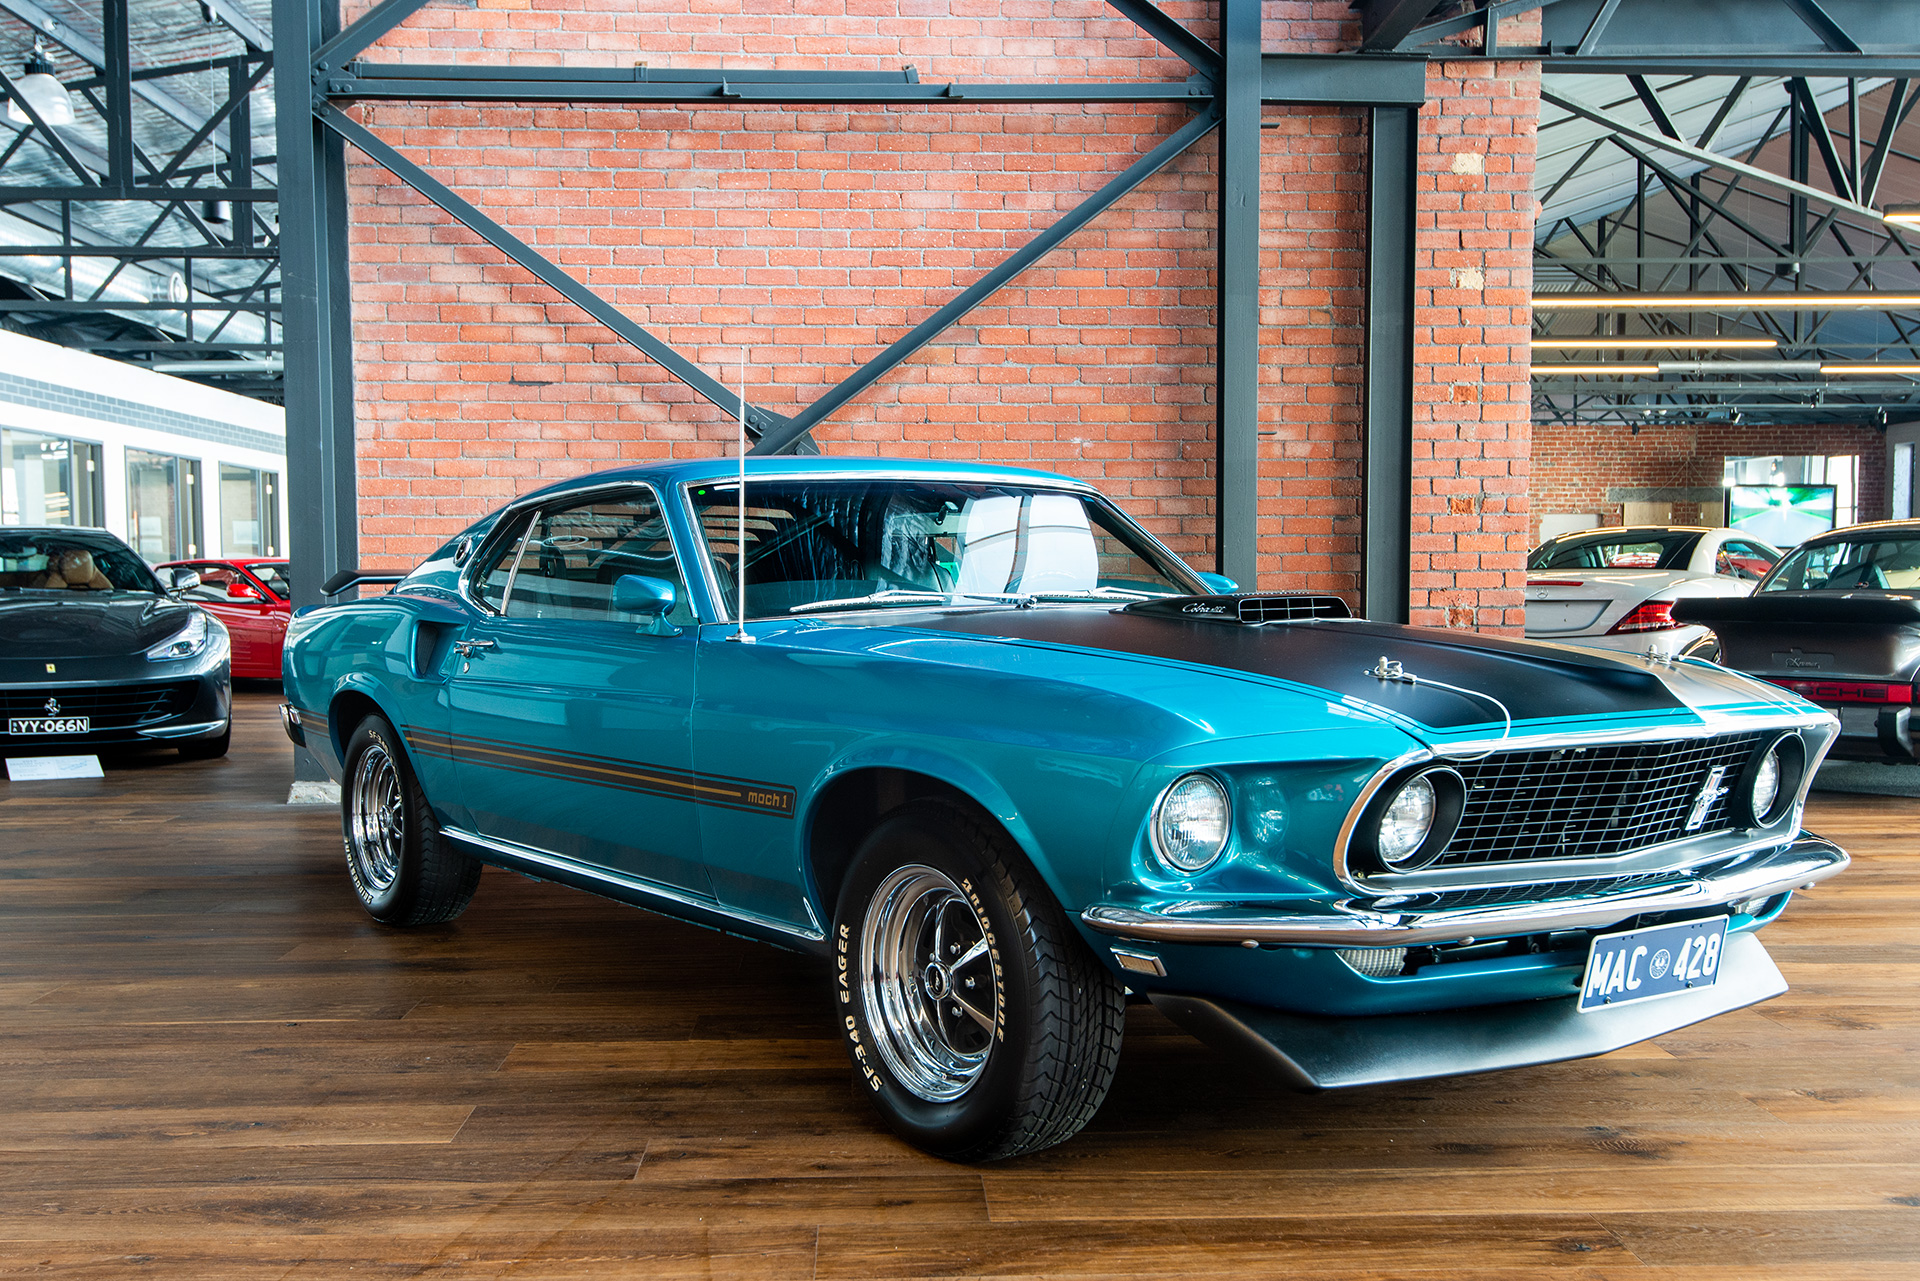 1969 Ford Mustang Mach 1 428 Cobra Jet - Richmonds - Classic and